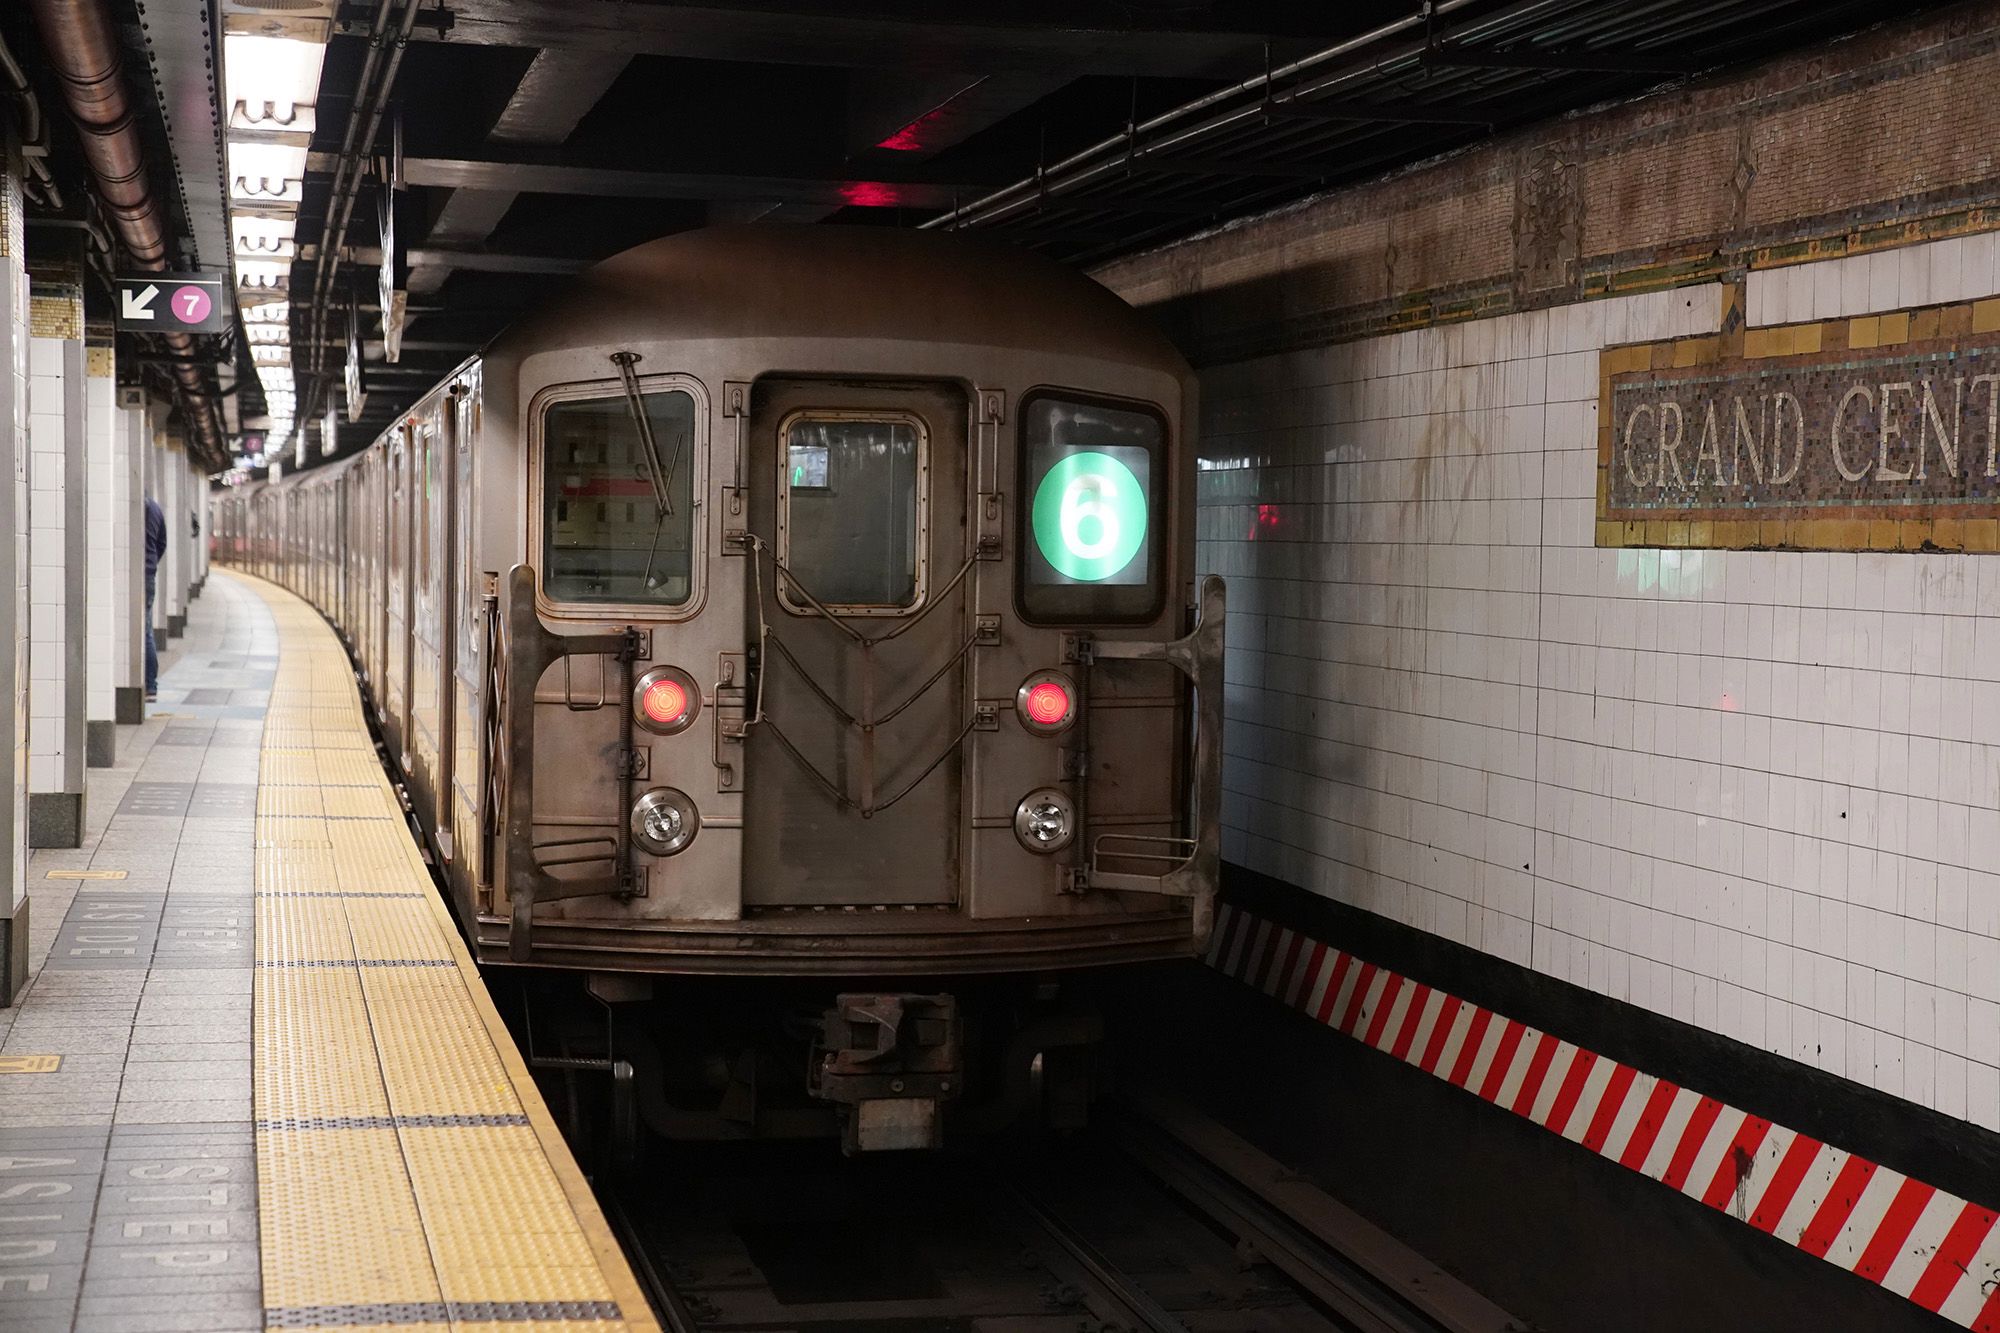 Straphanger Asked Man to Lower Music Volume, Slashed in the Face